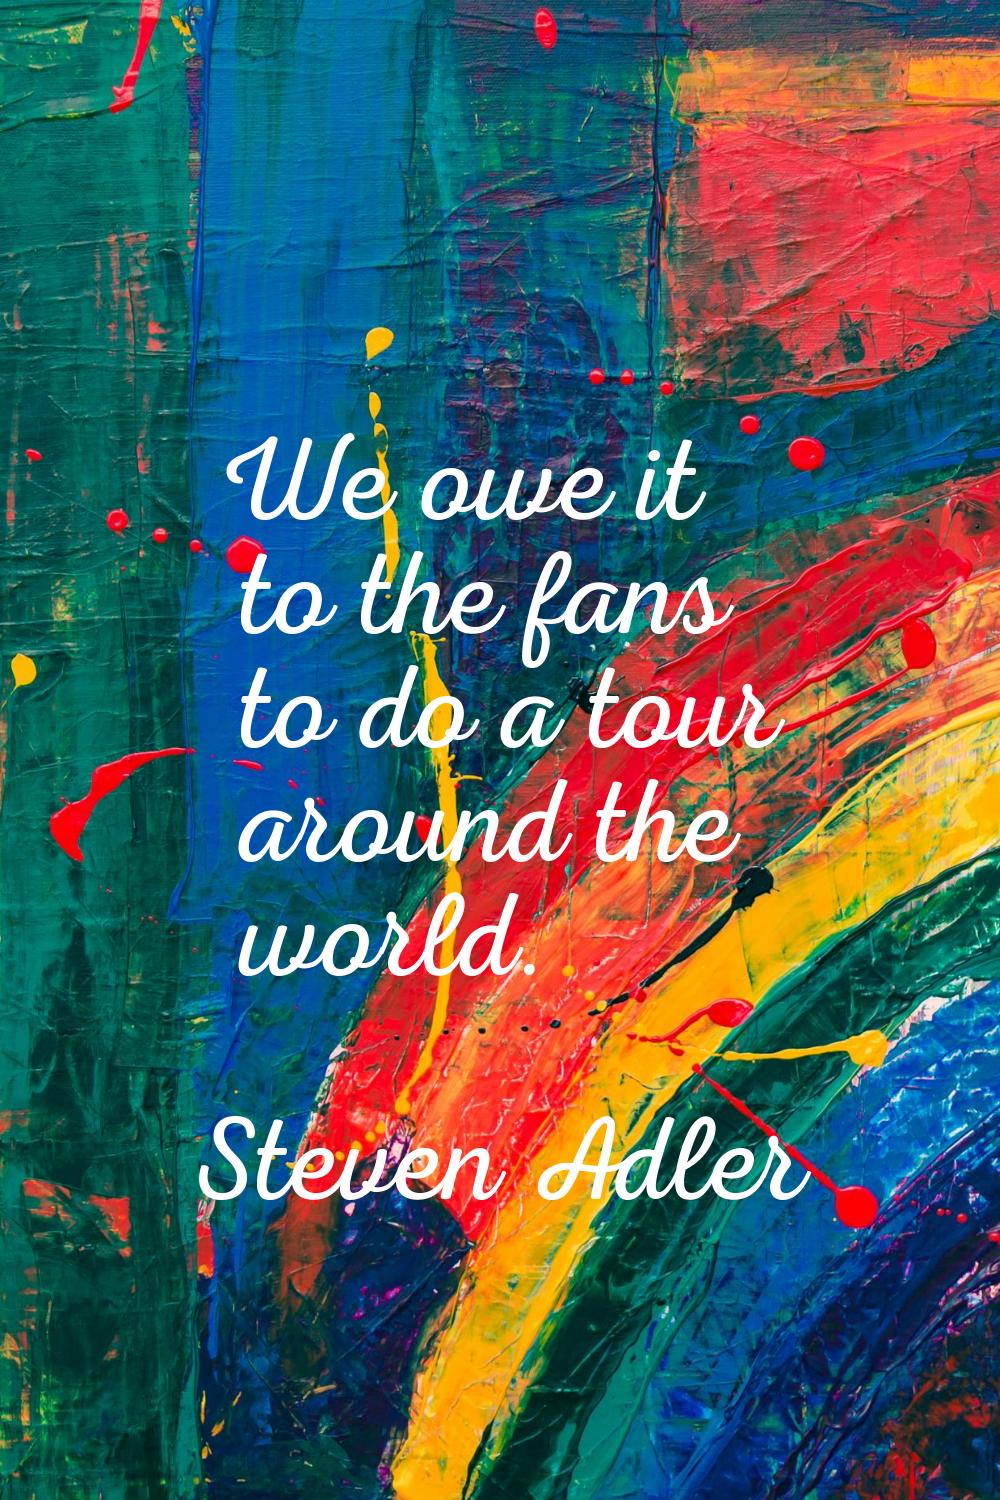 We owe it to the fans to do a tour around the world.